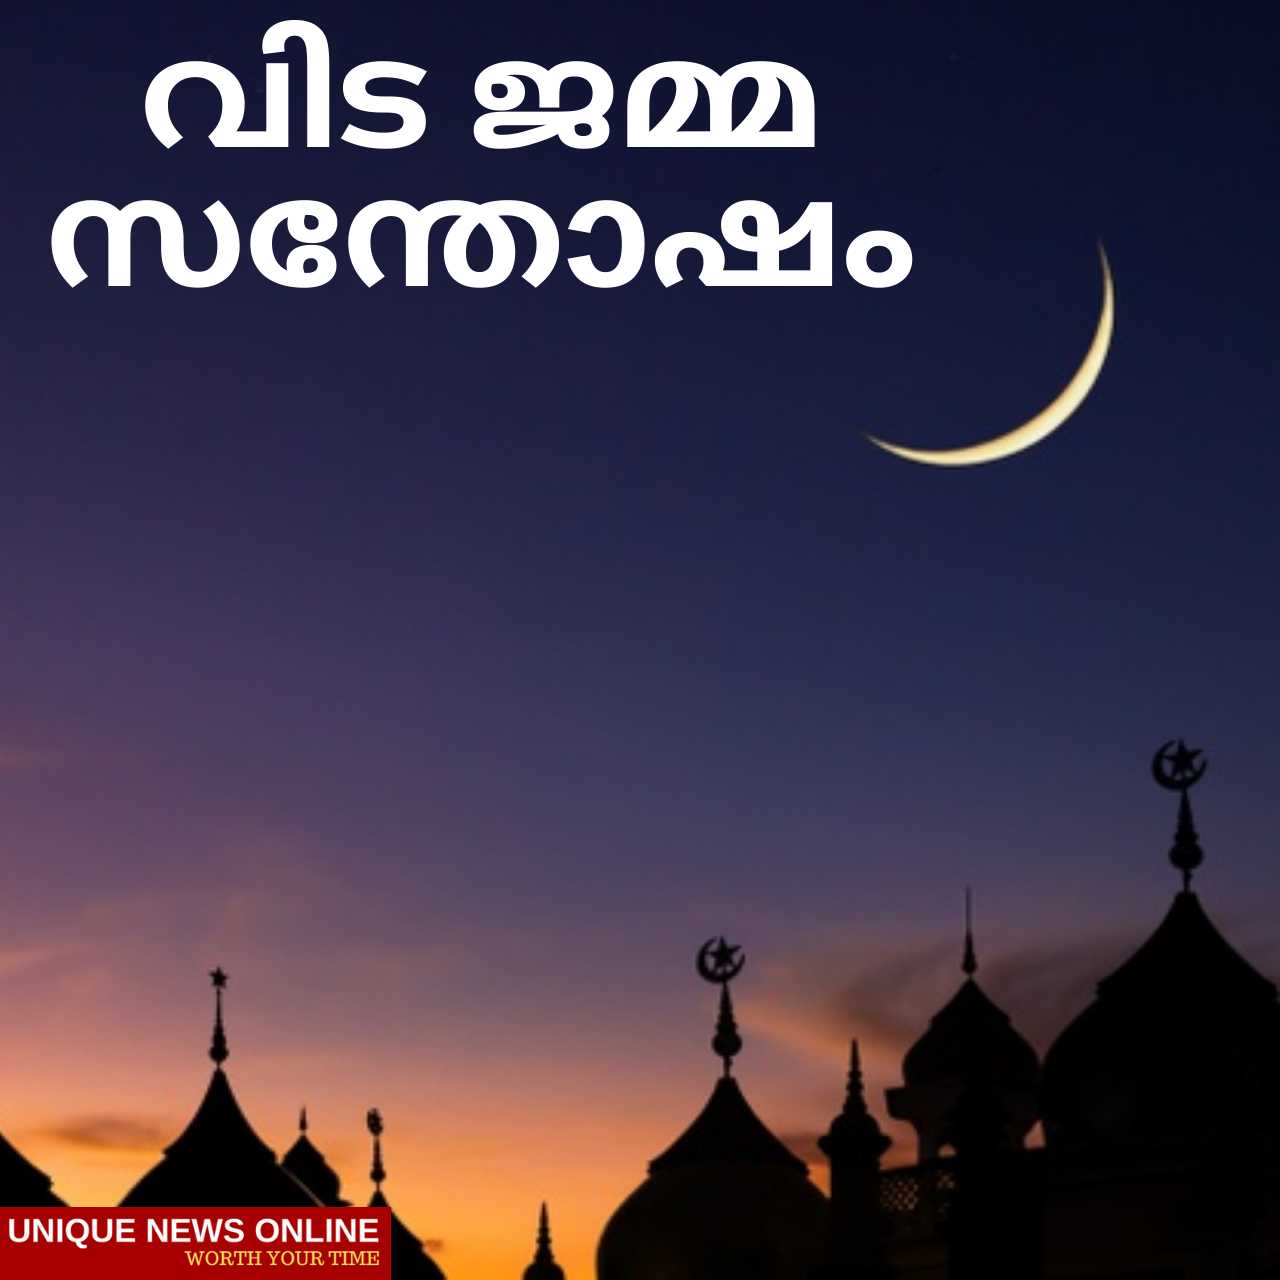 Jumma Mubarak 2021 Wishes in Tamil and Malayalam, Quotes, Messages, Greetings, and Images to Share